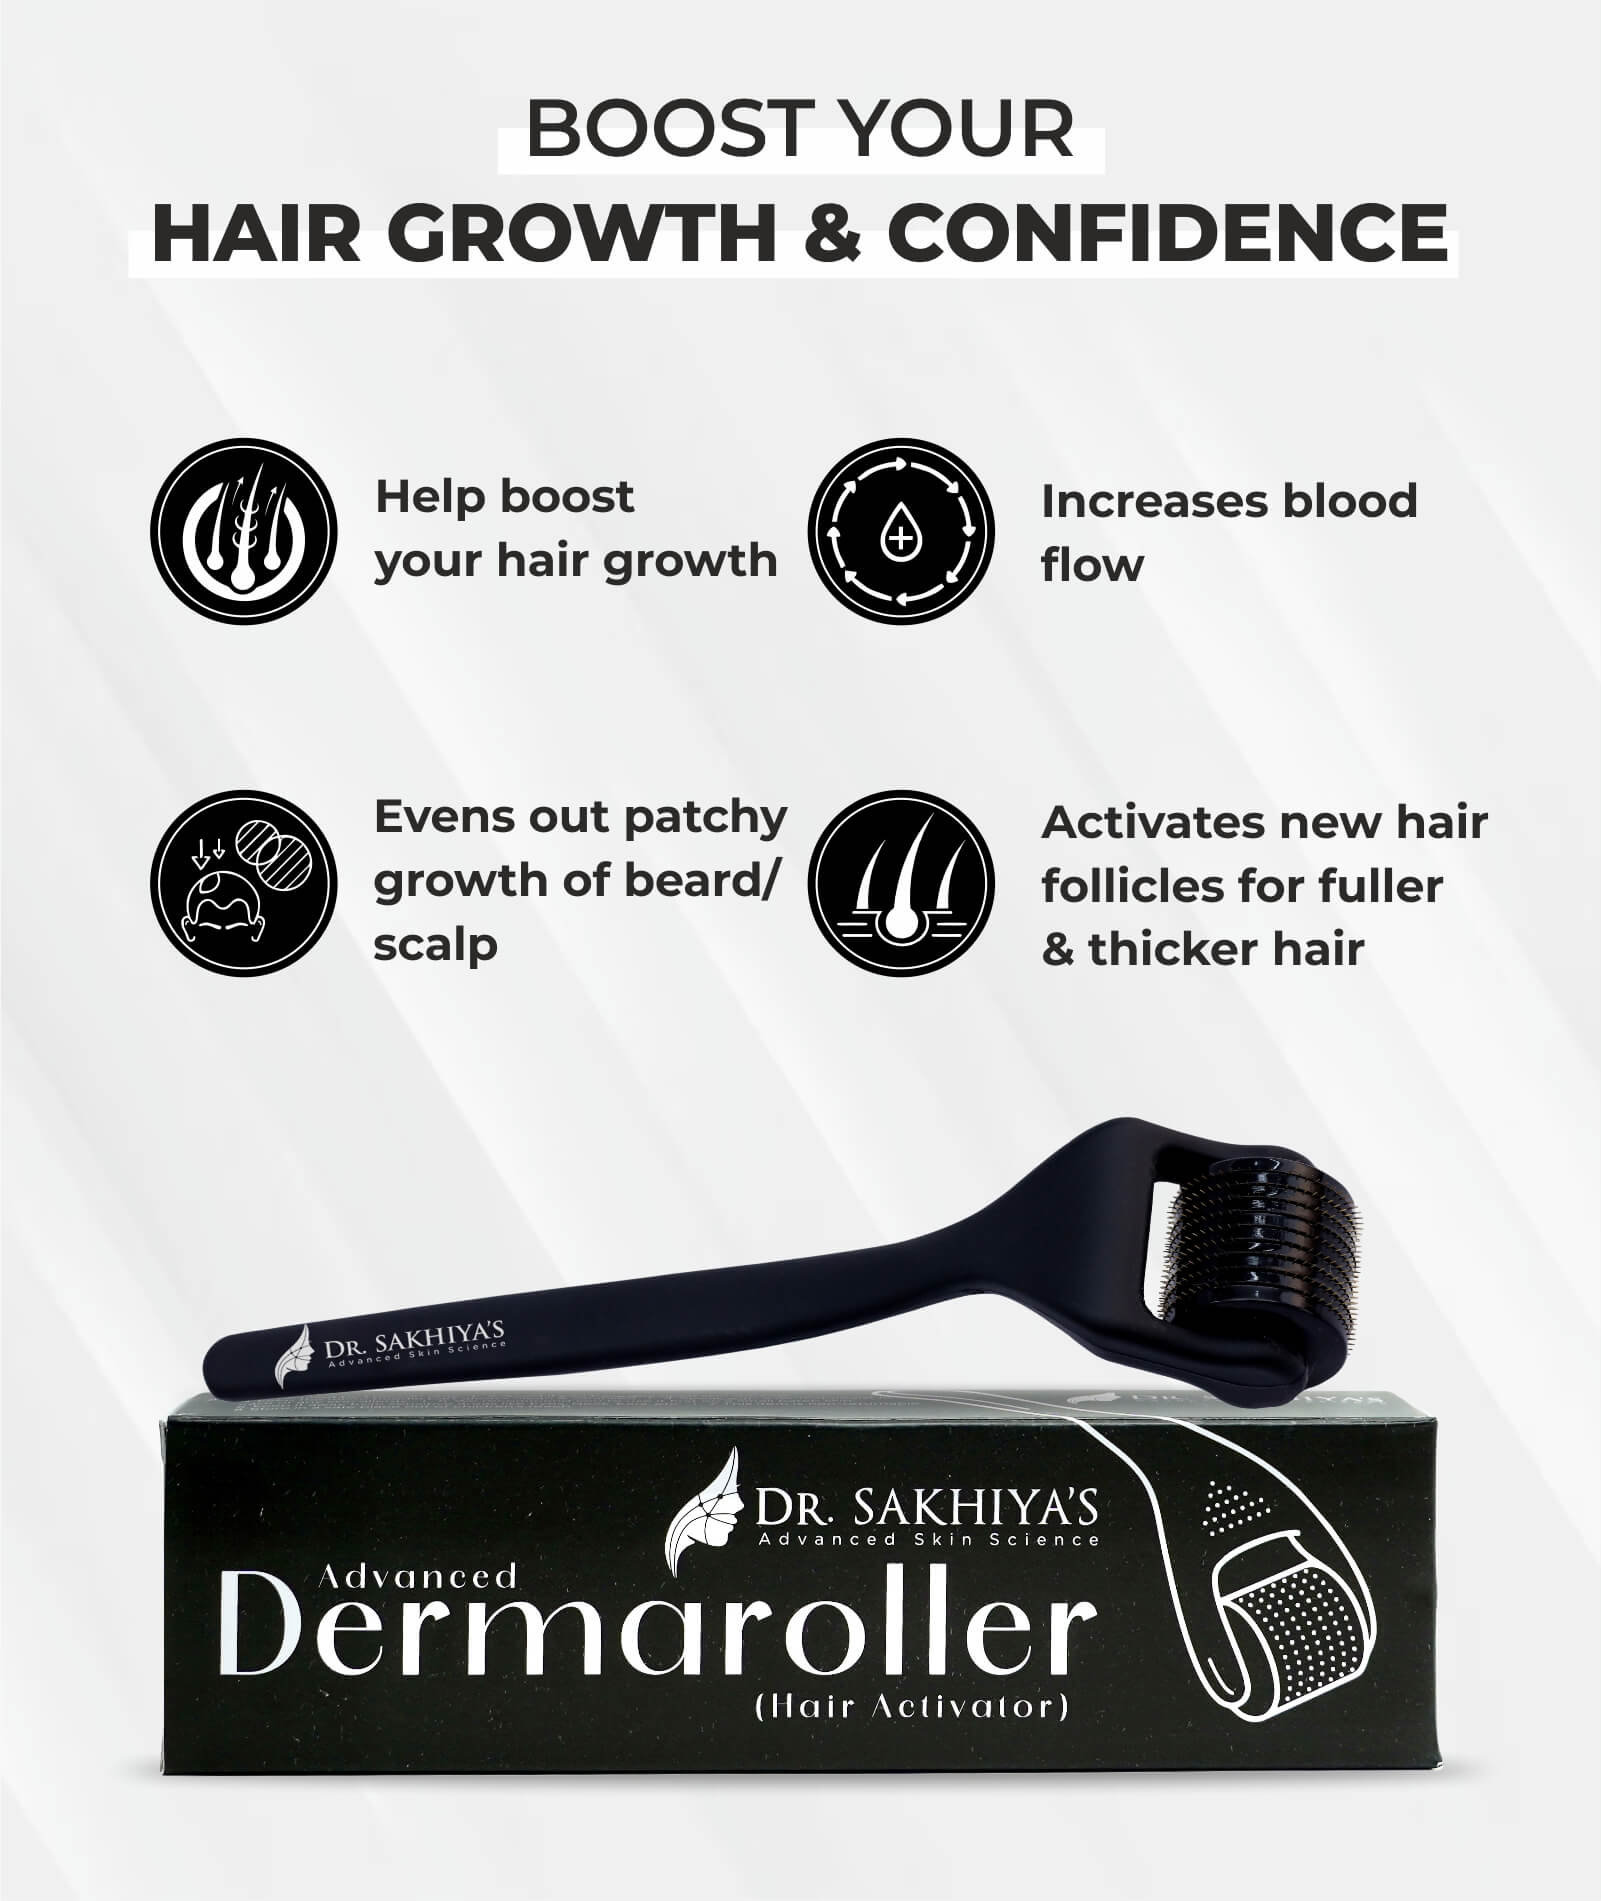 Boost Your Hair Growth And Confidence With Advance Hair Activator Derma Roller